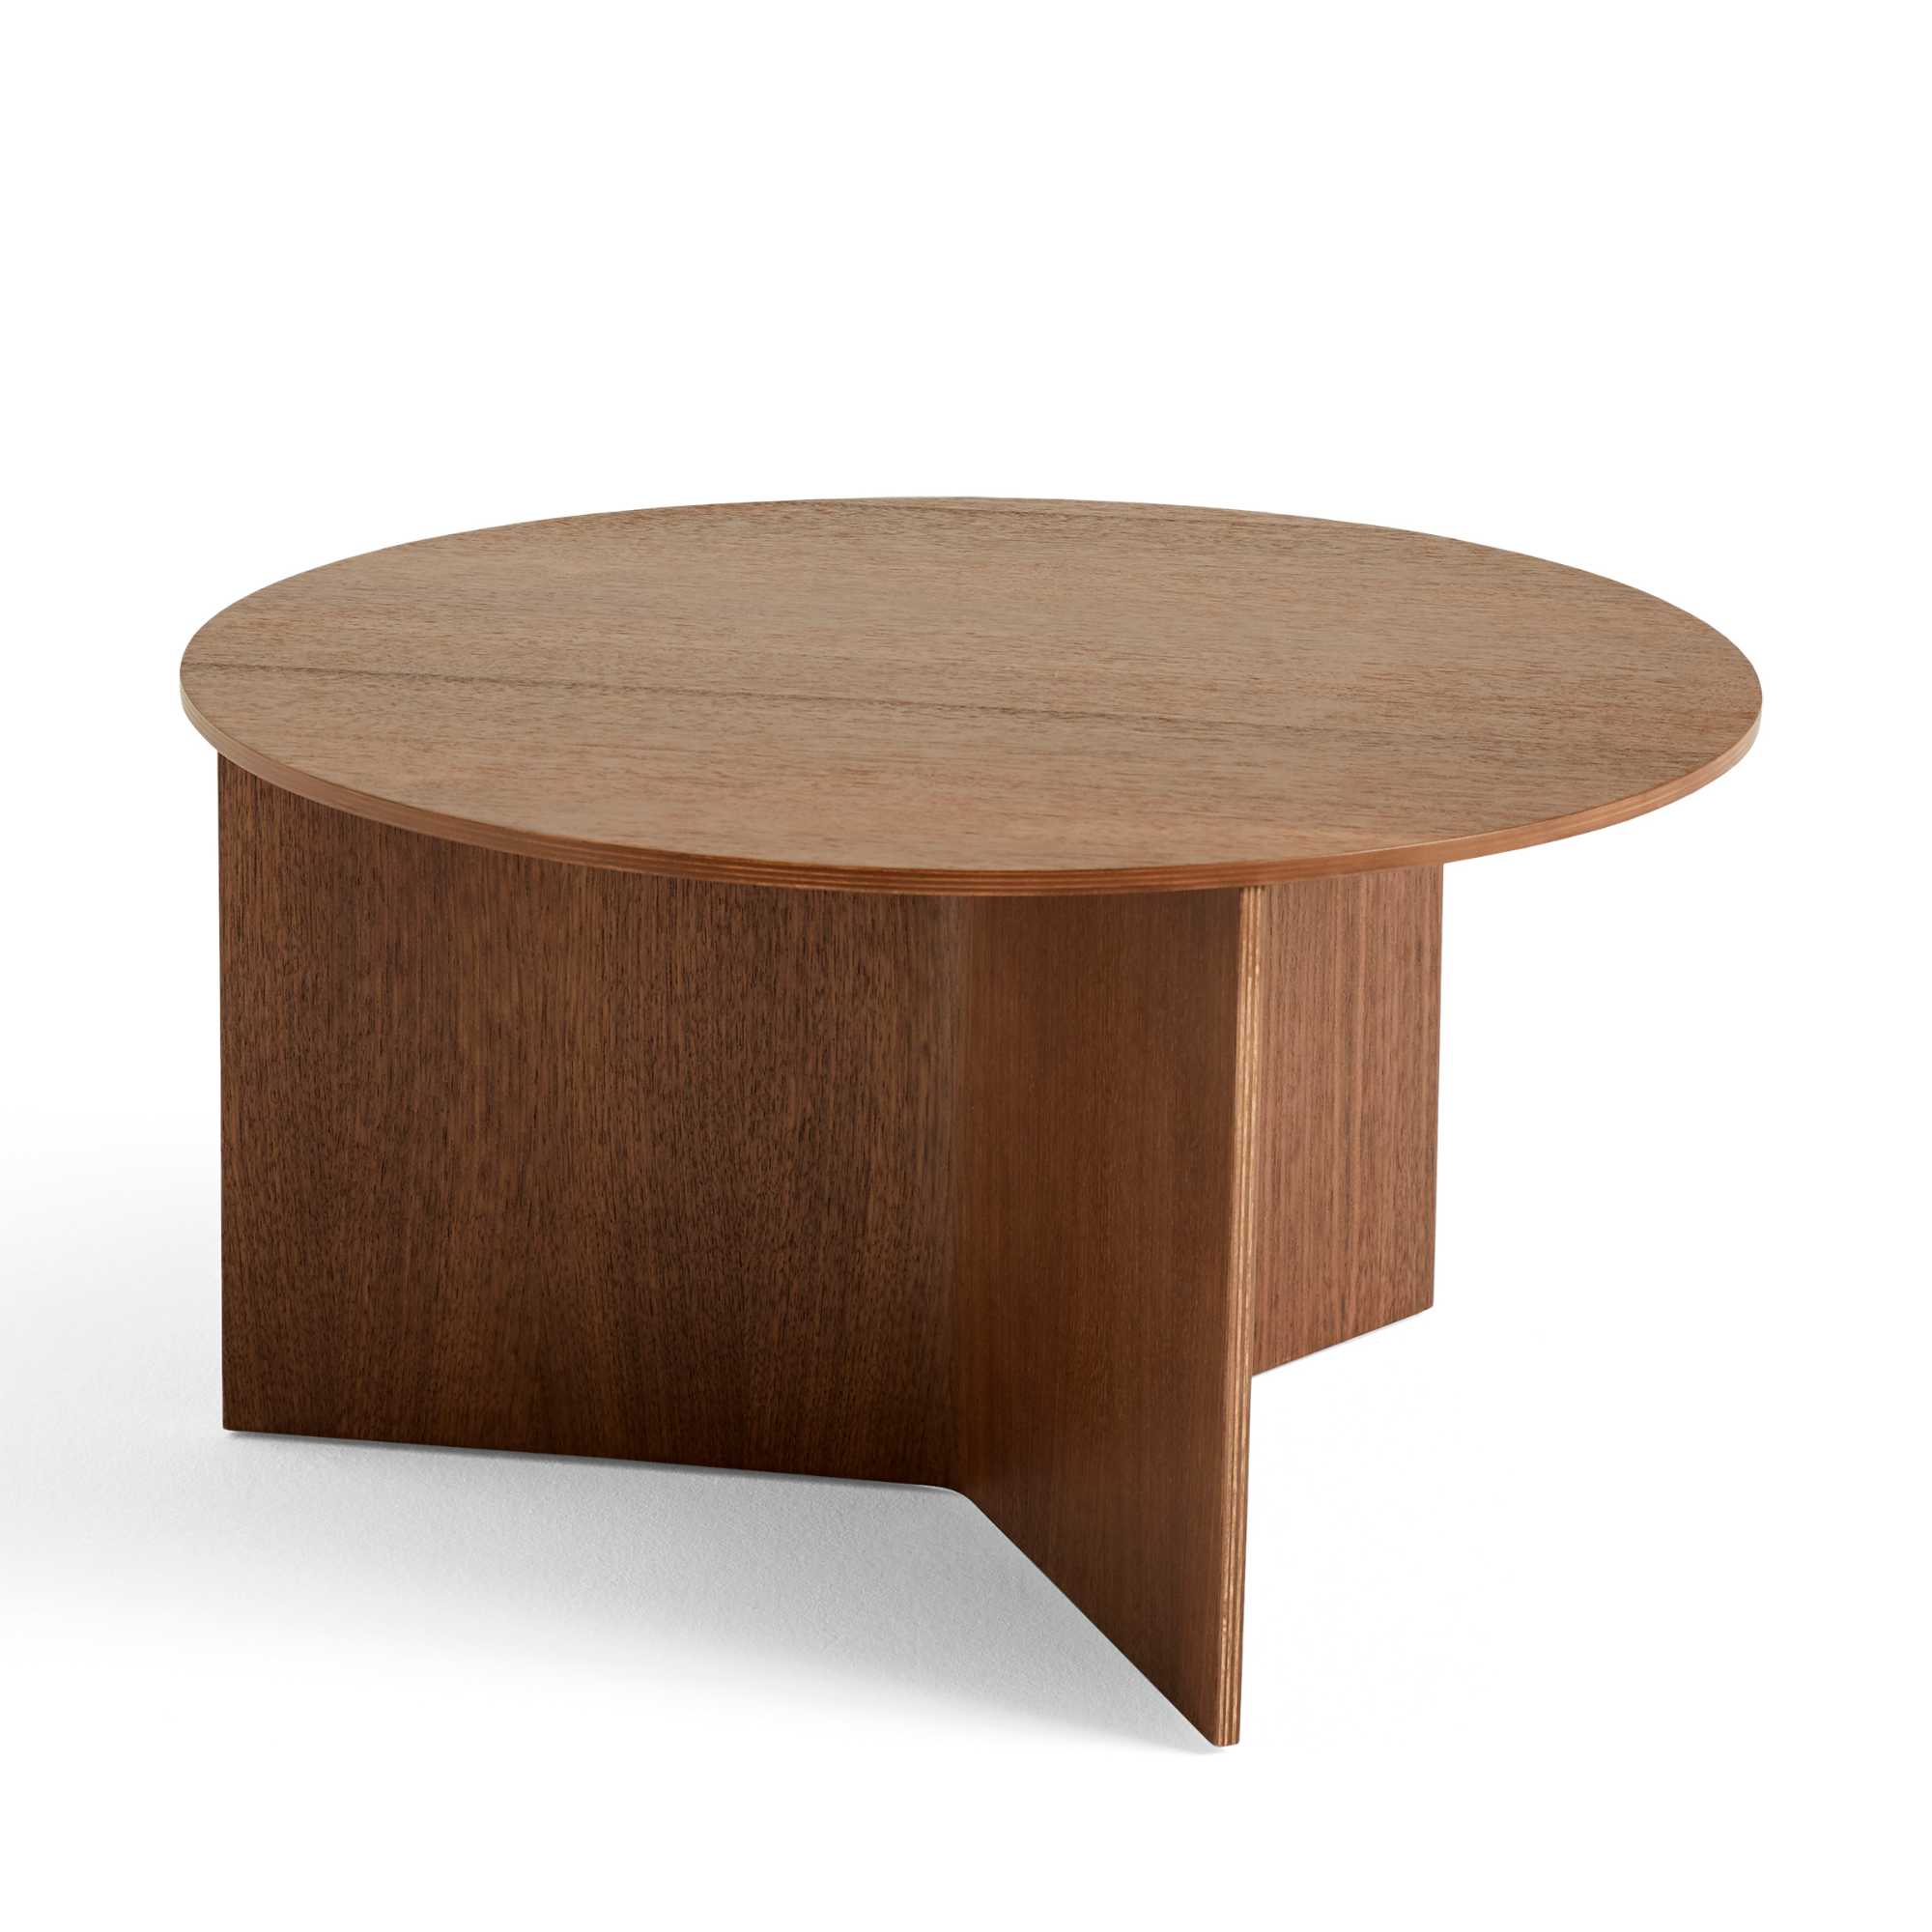 Slit Table Wood Round XL, Water-Based Lacquered Walnut (Φ65 x H35.5 cm)